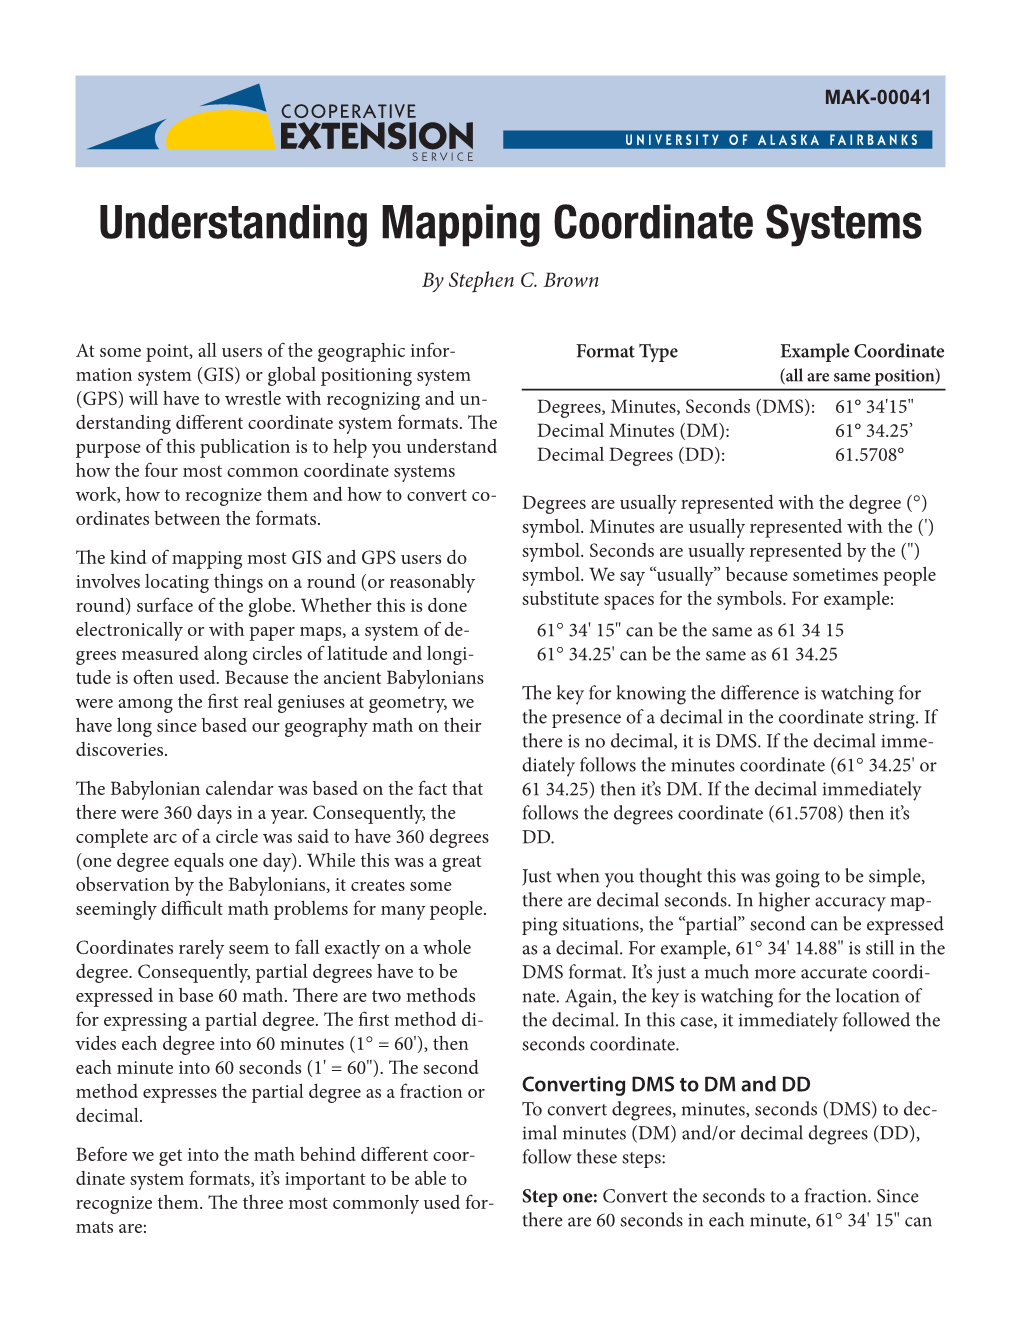 Understanding Mapping Coordinate Systems by Stephen C